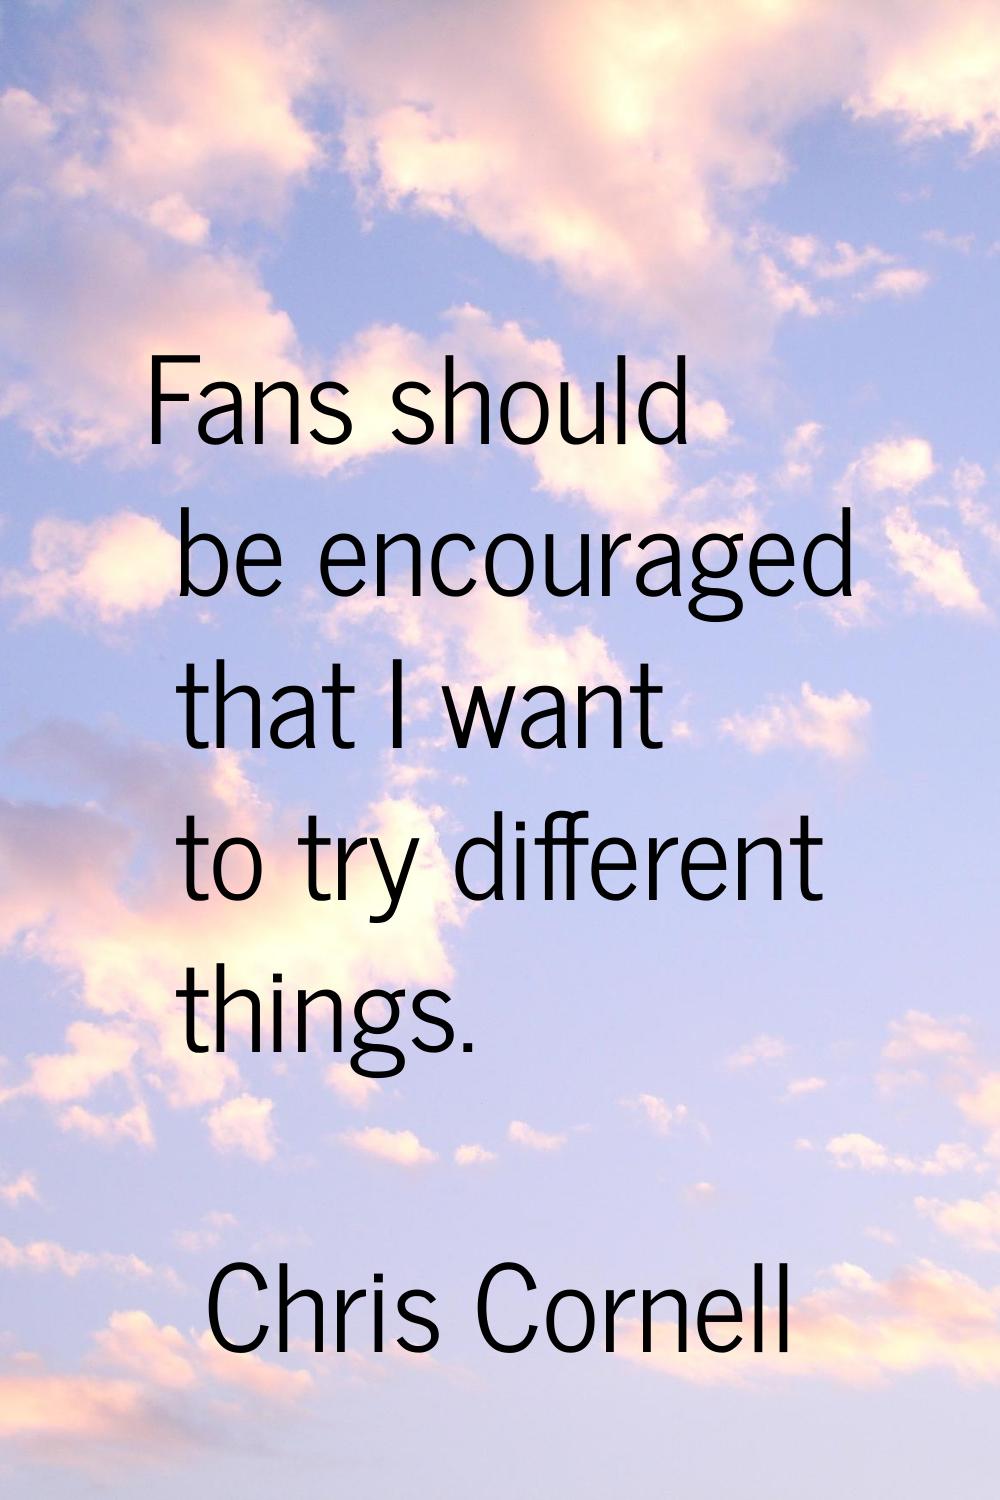 Fans should be encouraged that I want to try different things.